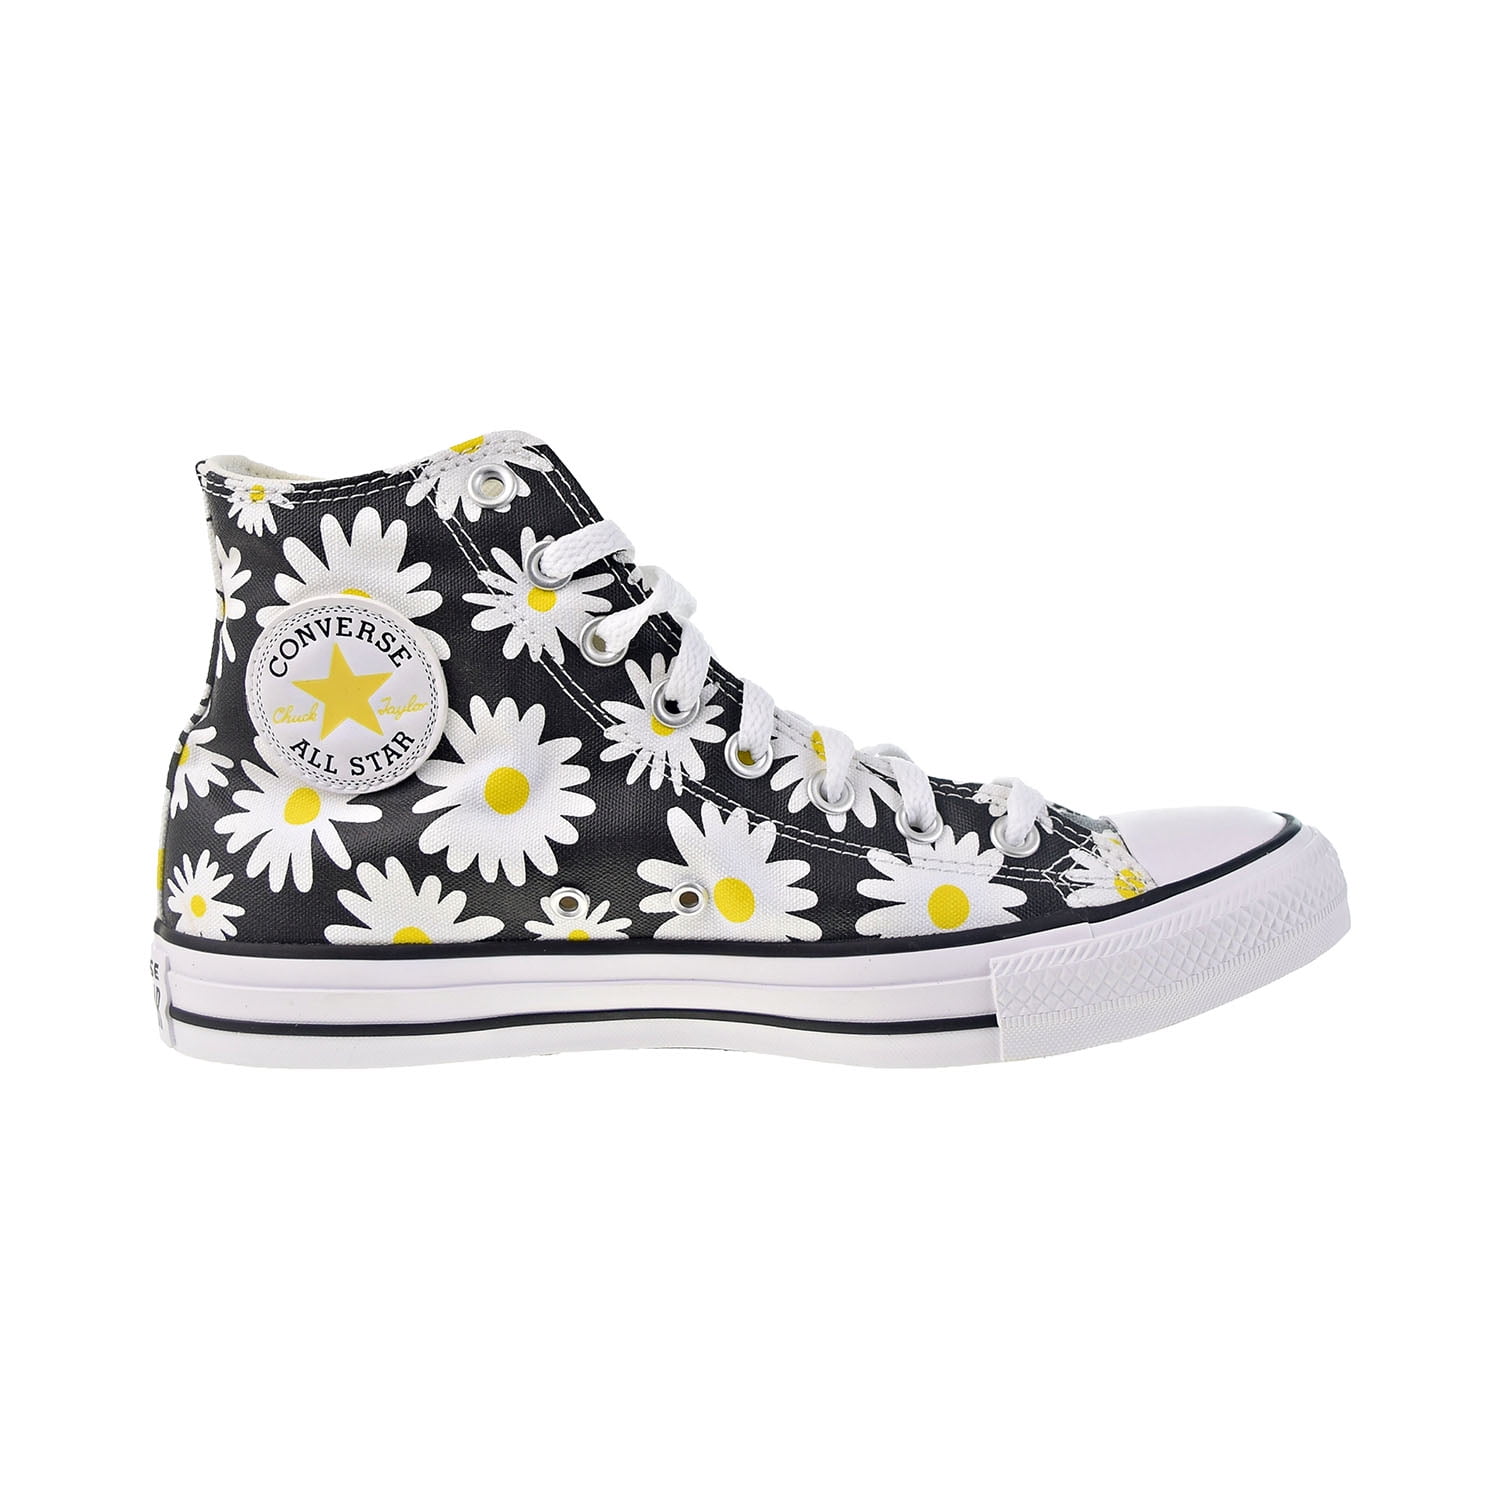 converse all star black and yellow